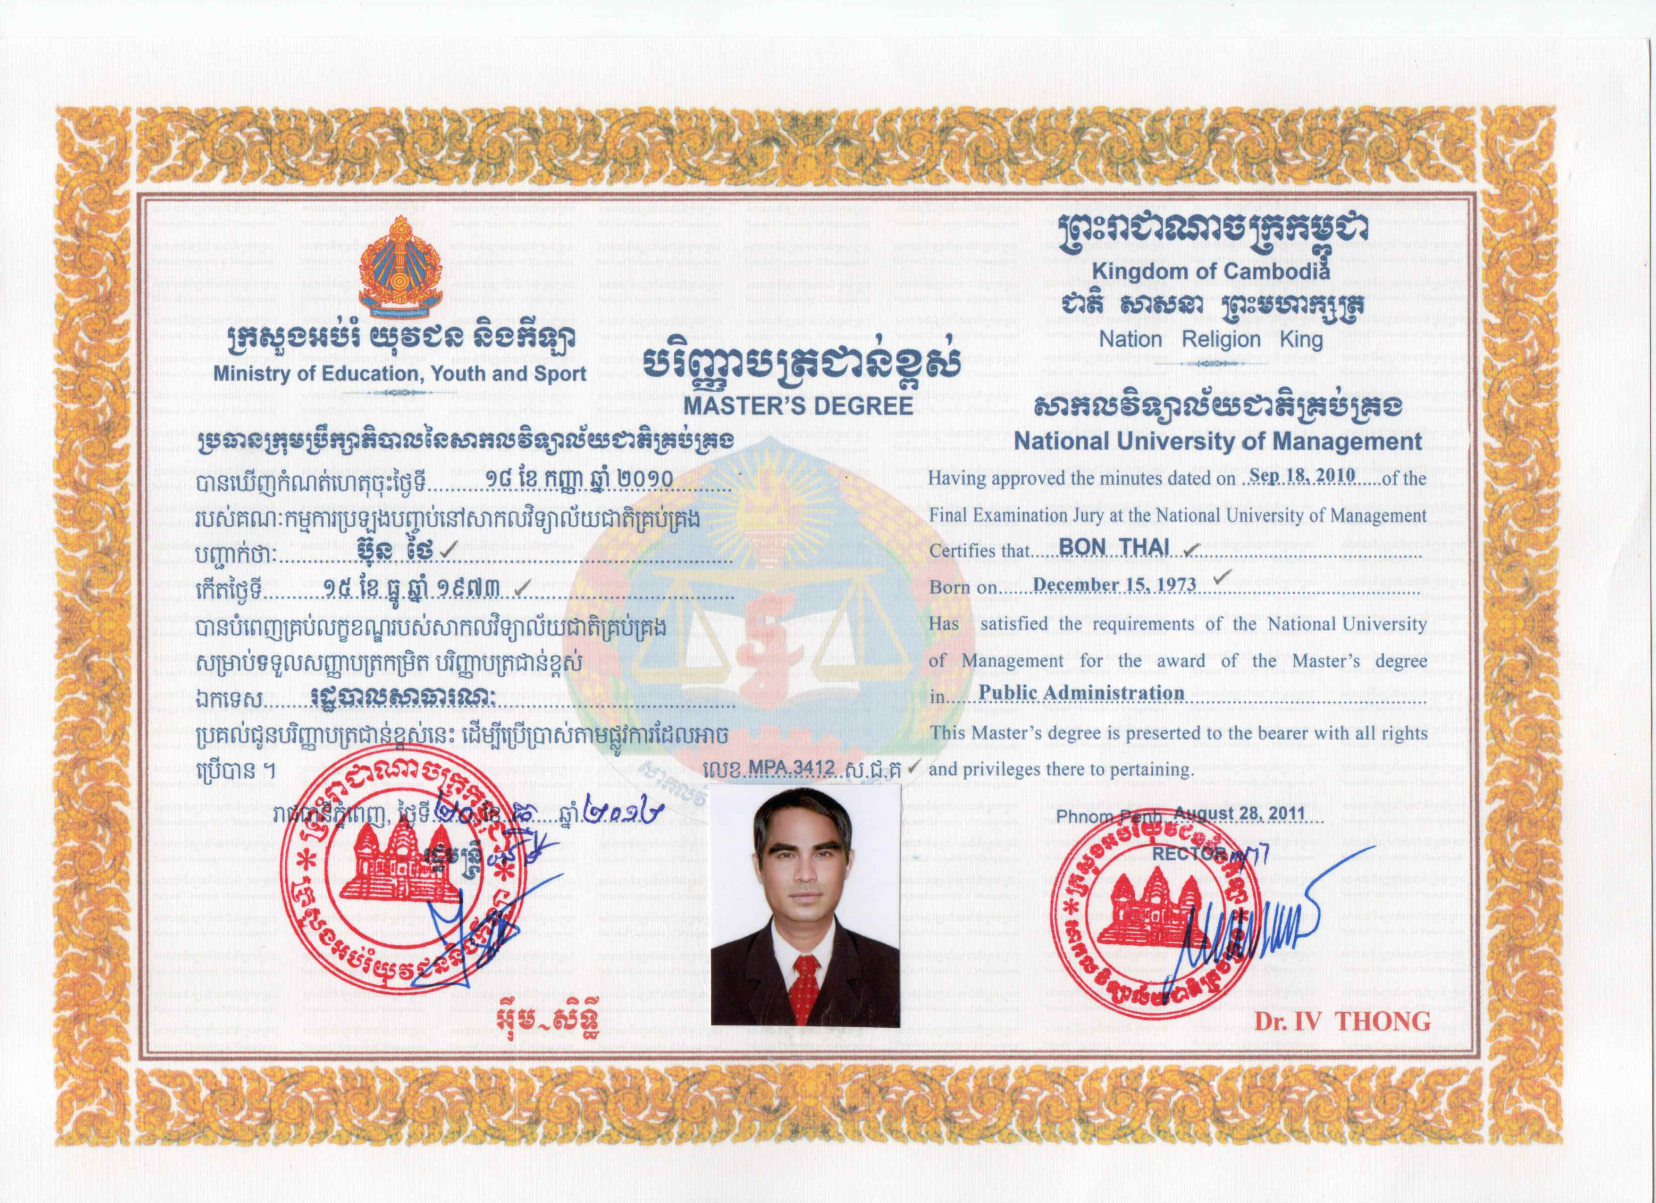 My Master's Degree of Public Admnistration.